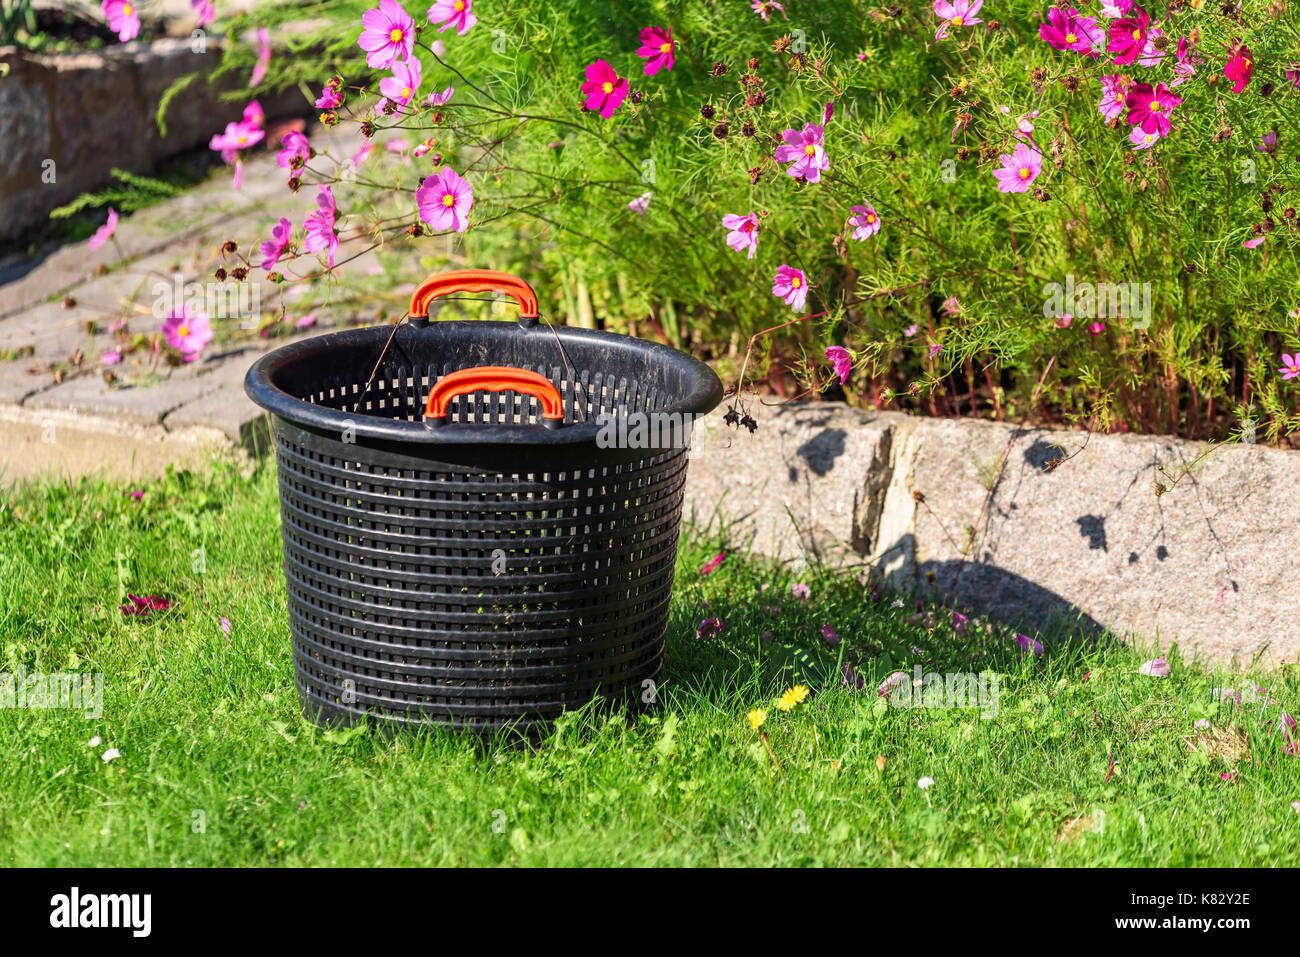 Empty black plastic garden basket on grass with pink flowers behind. Stock Photo